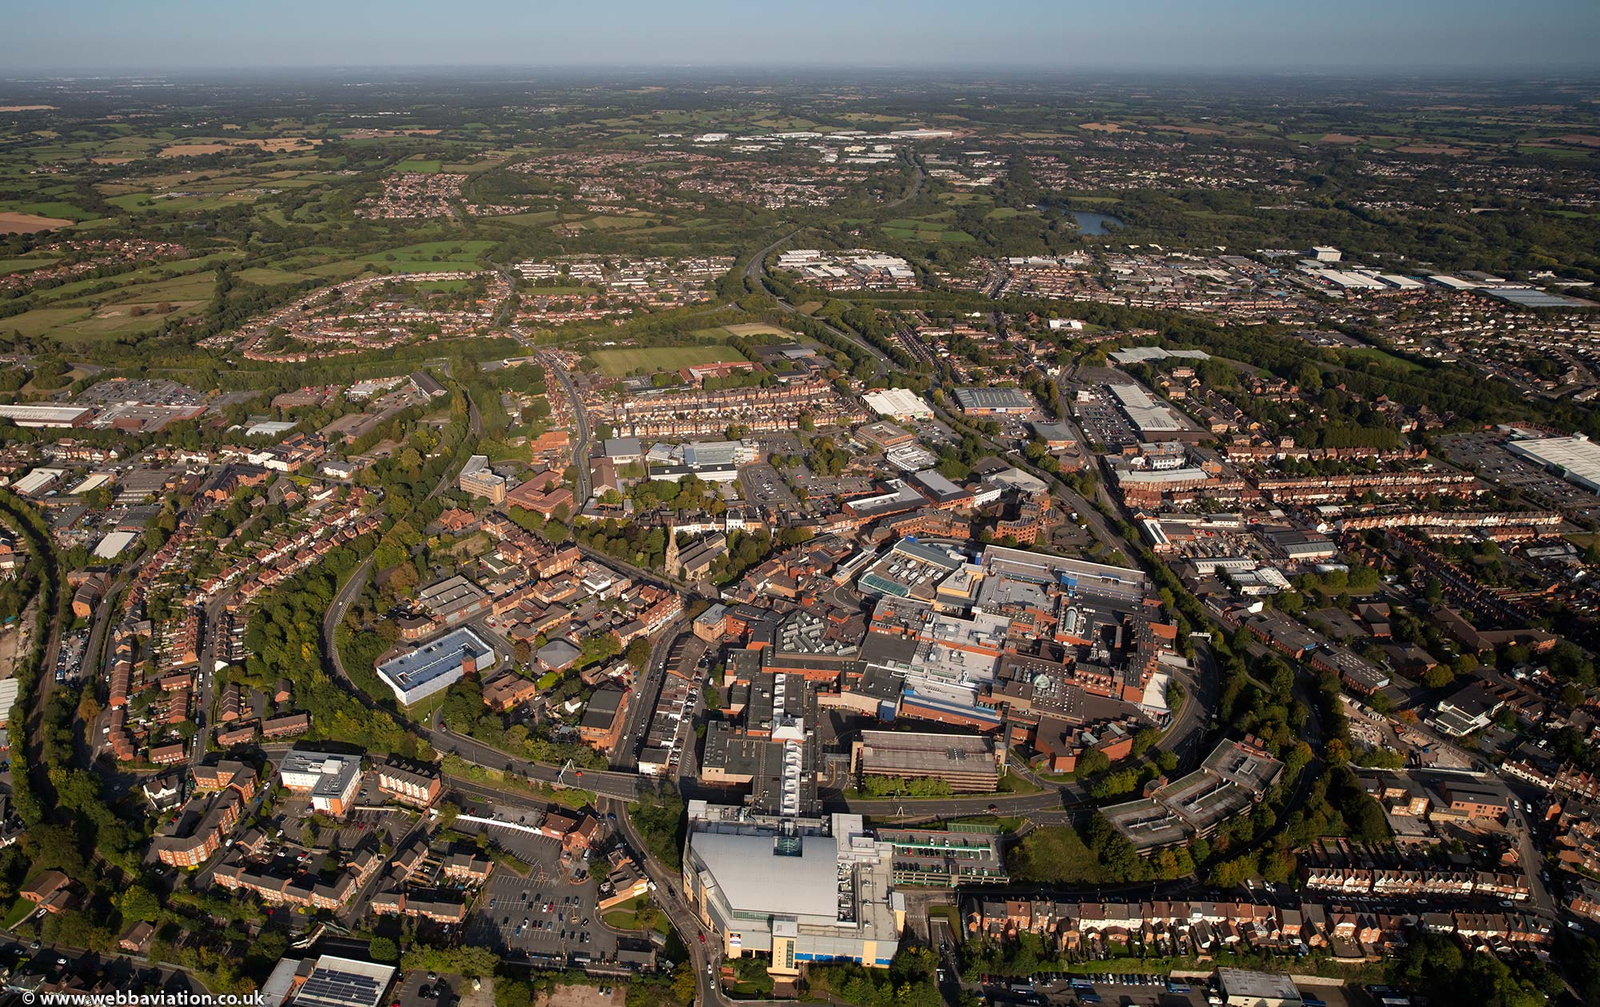 Redditch town centre Worcestershire from the air